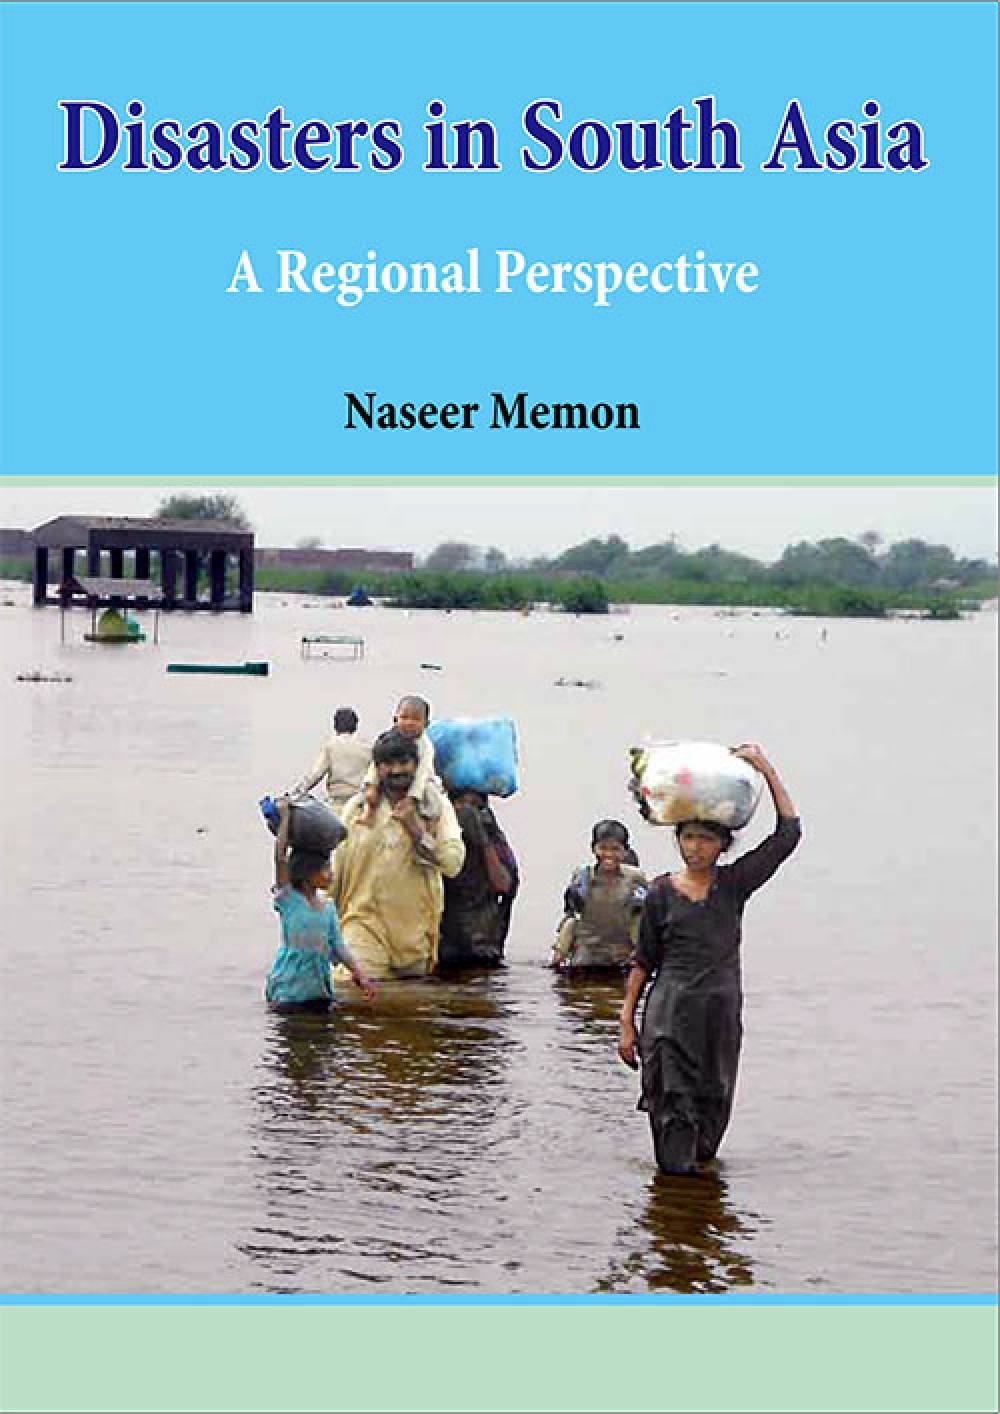 Disasters in South Asia-Regional Perspective